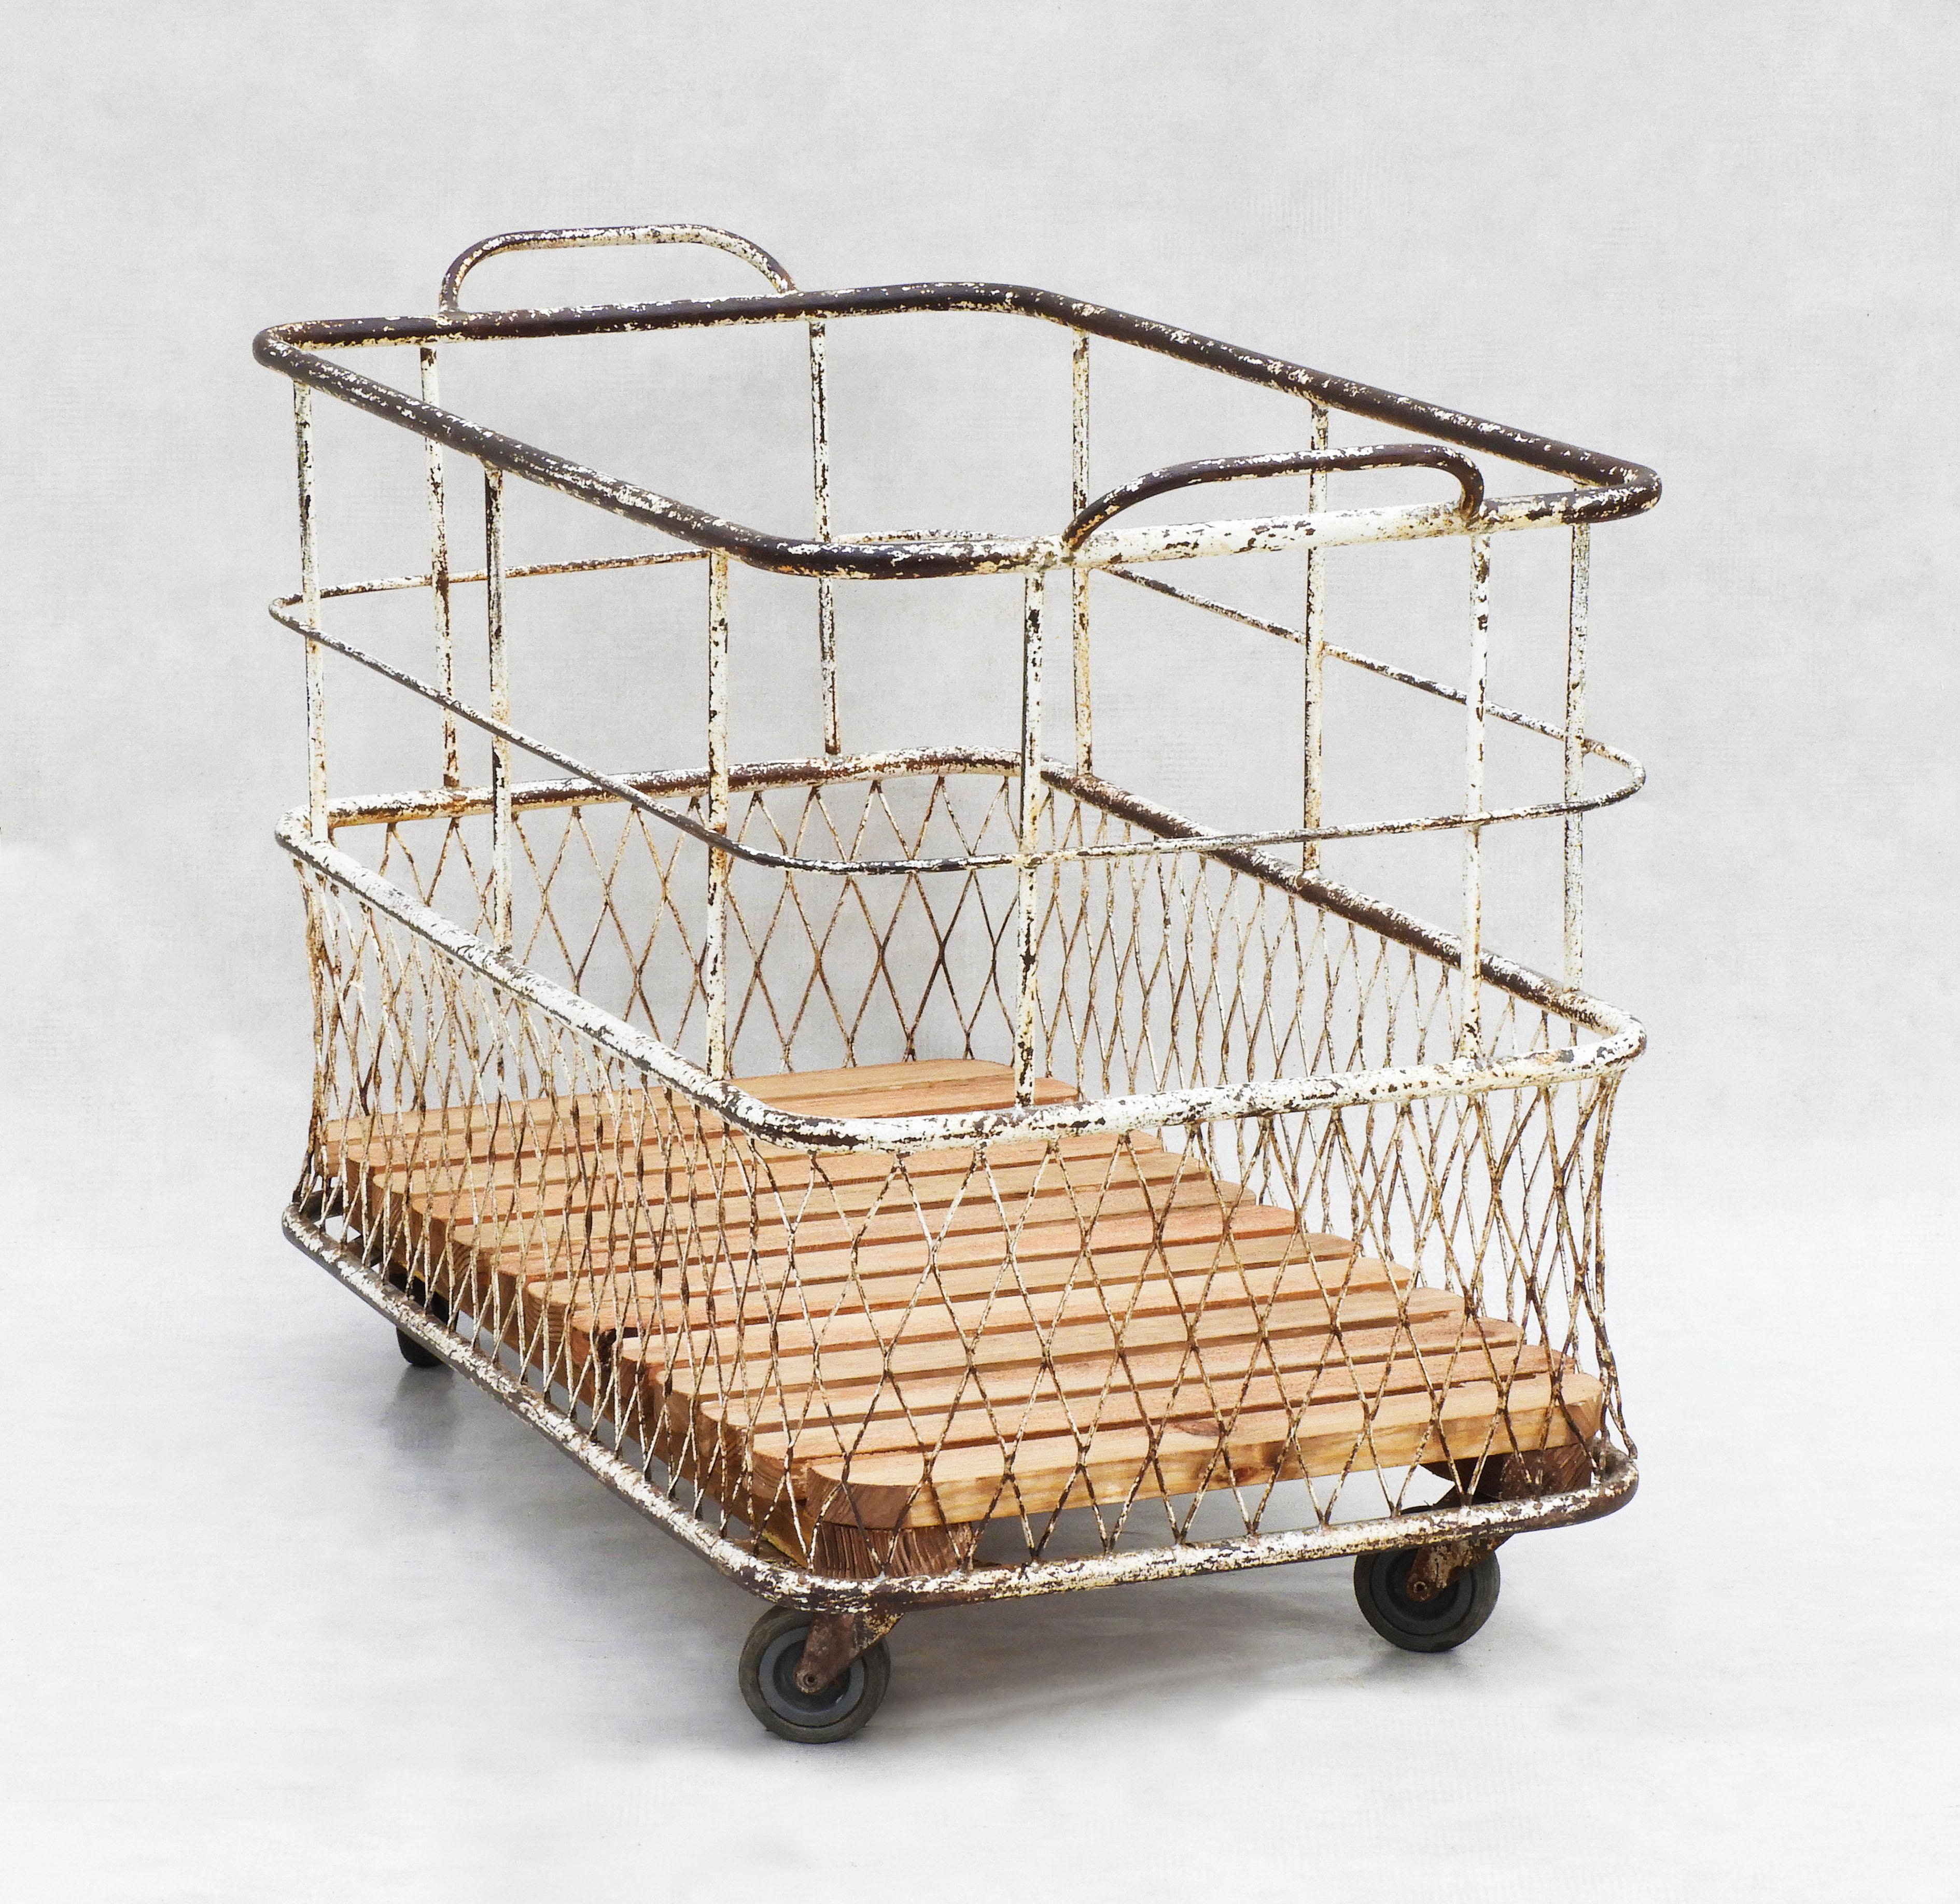 Large French baker's bread cart, provenance from a boulangerie in the southwest of France.  
Wonderfully distressed and full of character, this basket was used to carry the freshly baked baguettes from the bakery to the shop front. Versatile and